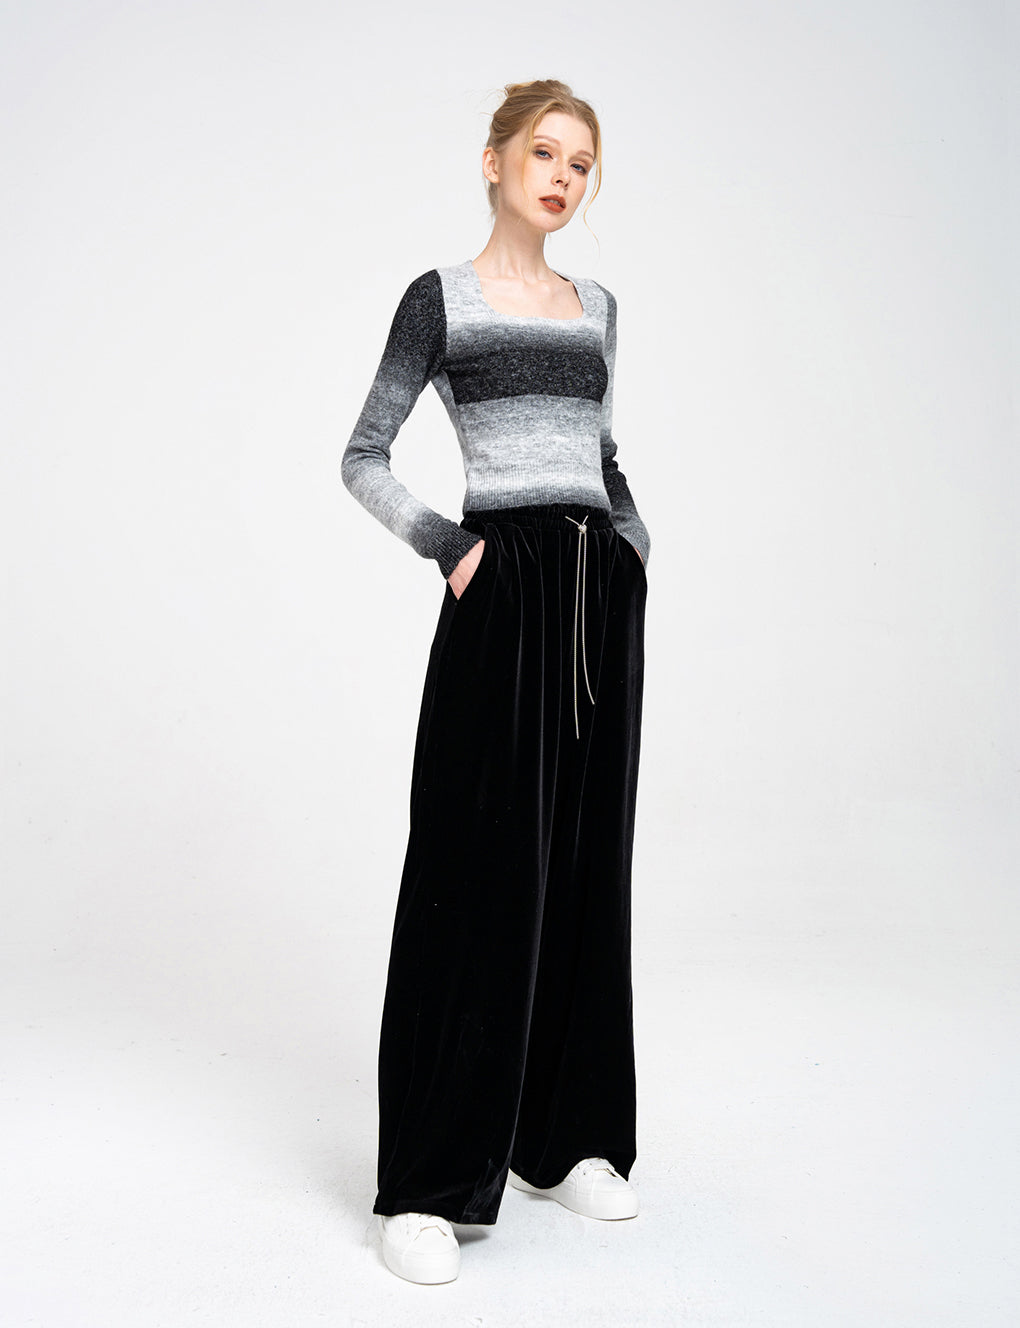 Gradient Pattern Square Neck Wool-blend Sweater